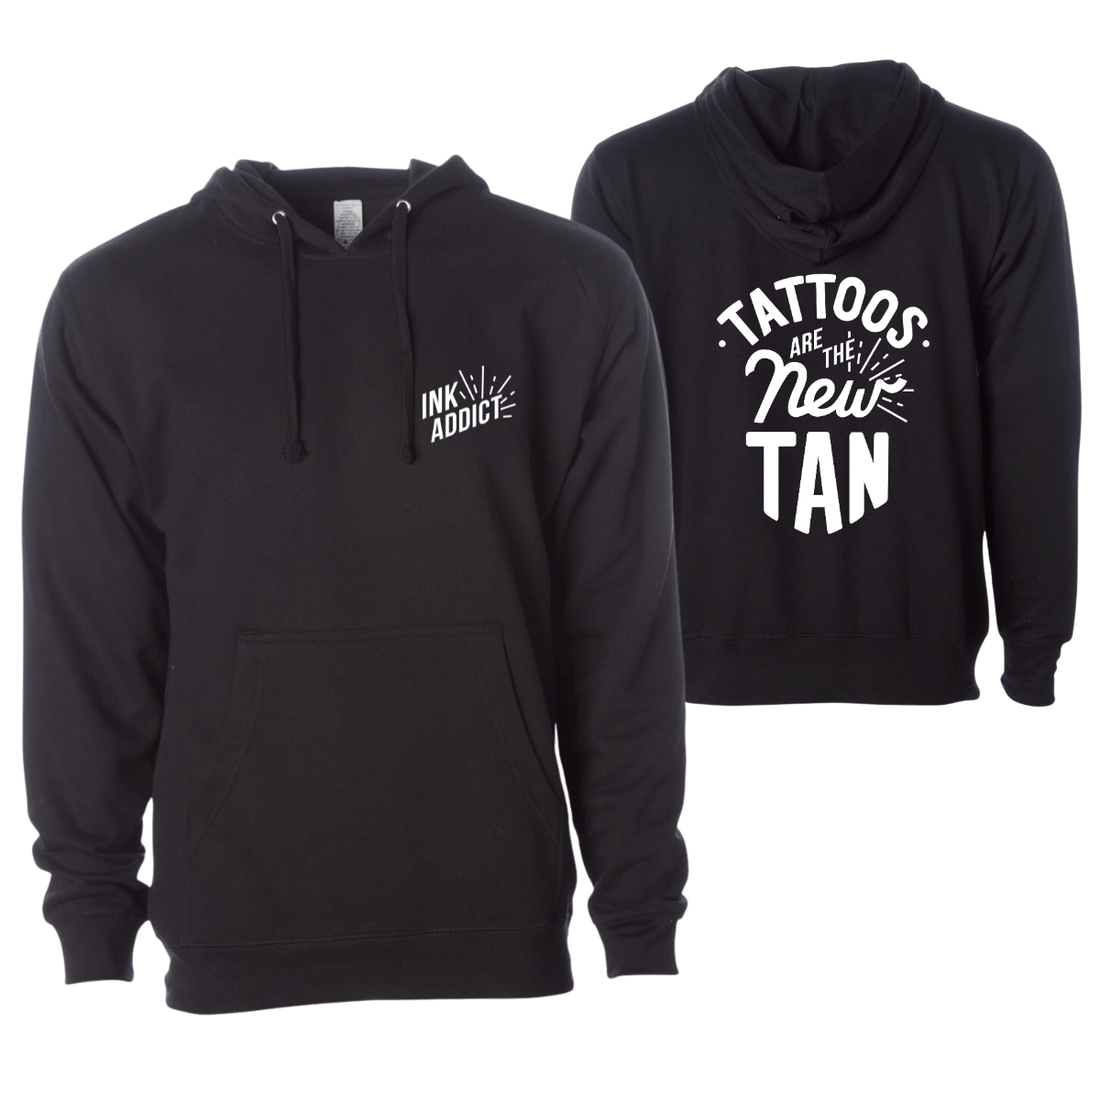 Tattoos Are The New Tan Unisex Pullover